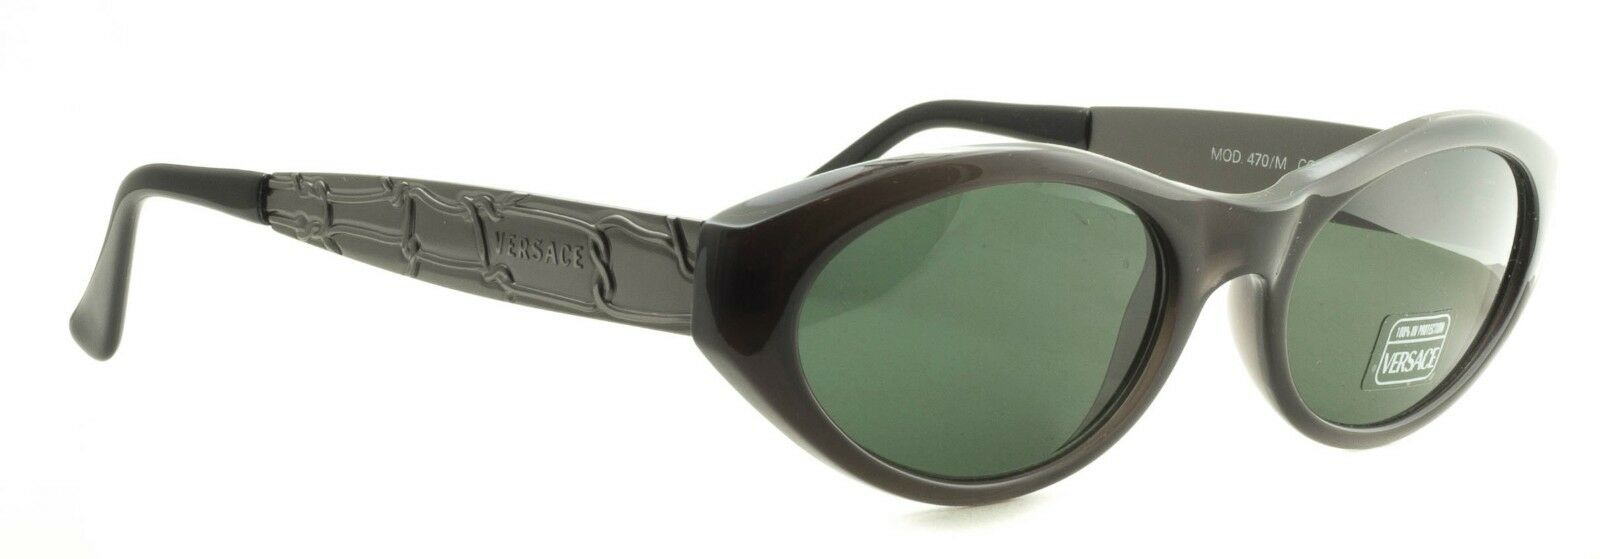 VERSACE MOD 470/M COL 685 Vintage Sunglasses Shades BNIB Brand New in Case ITALY